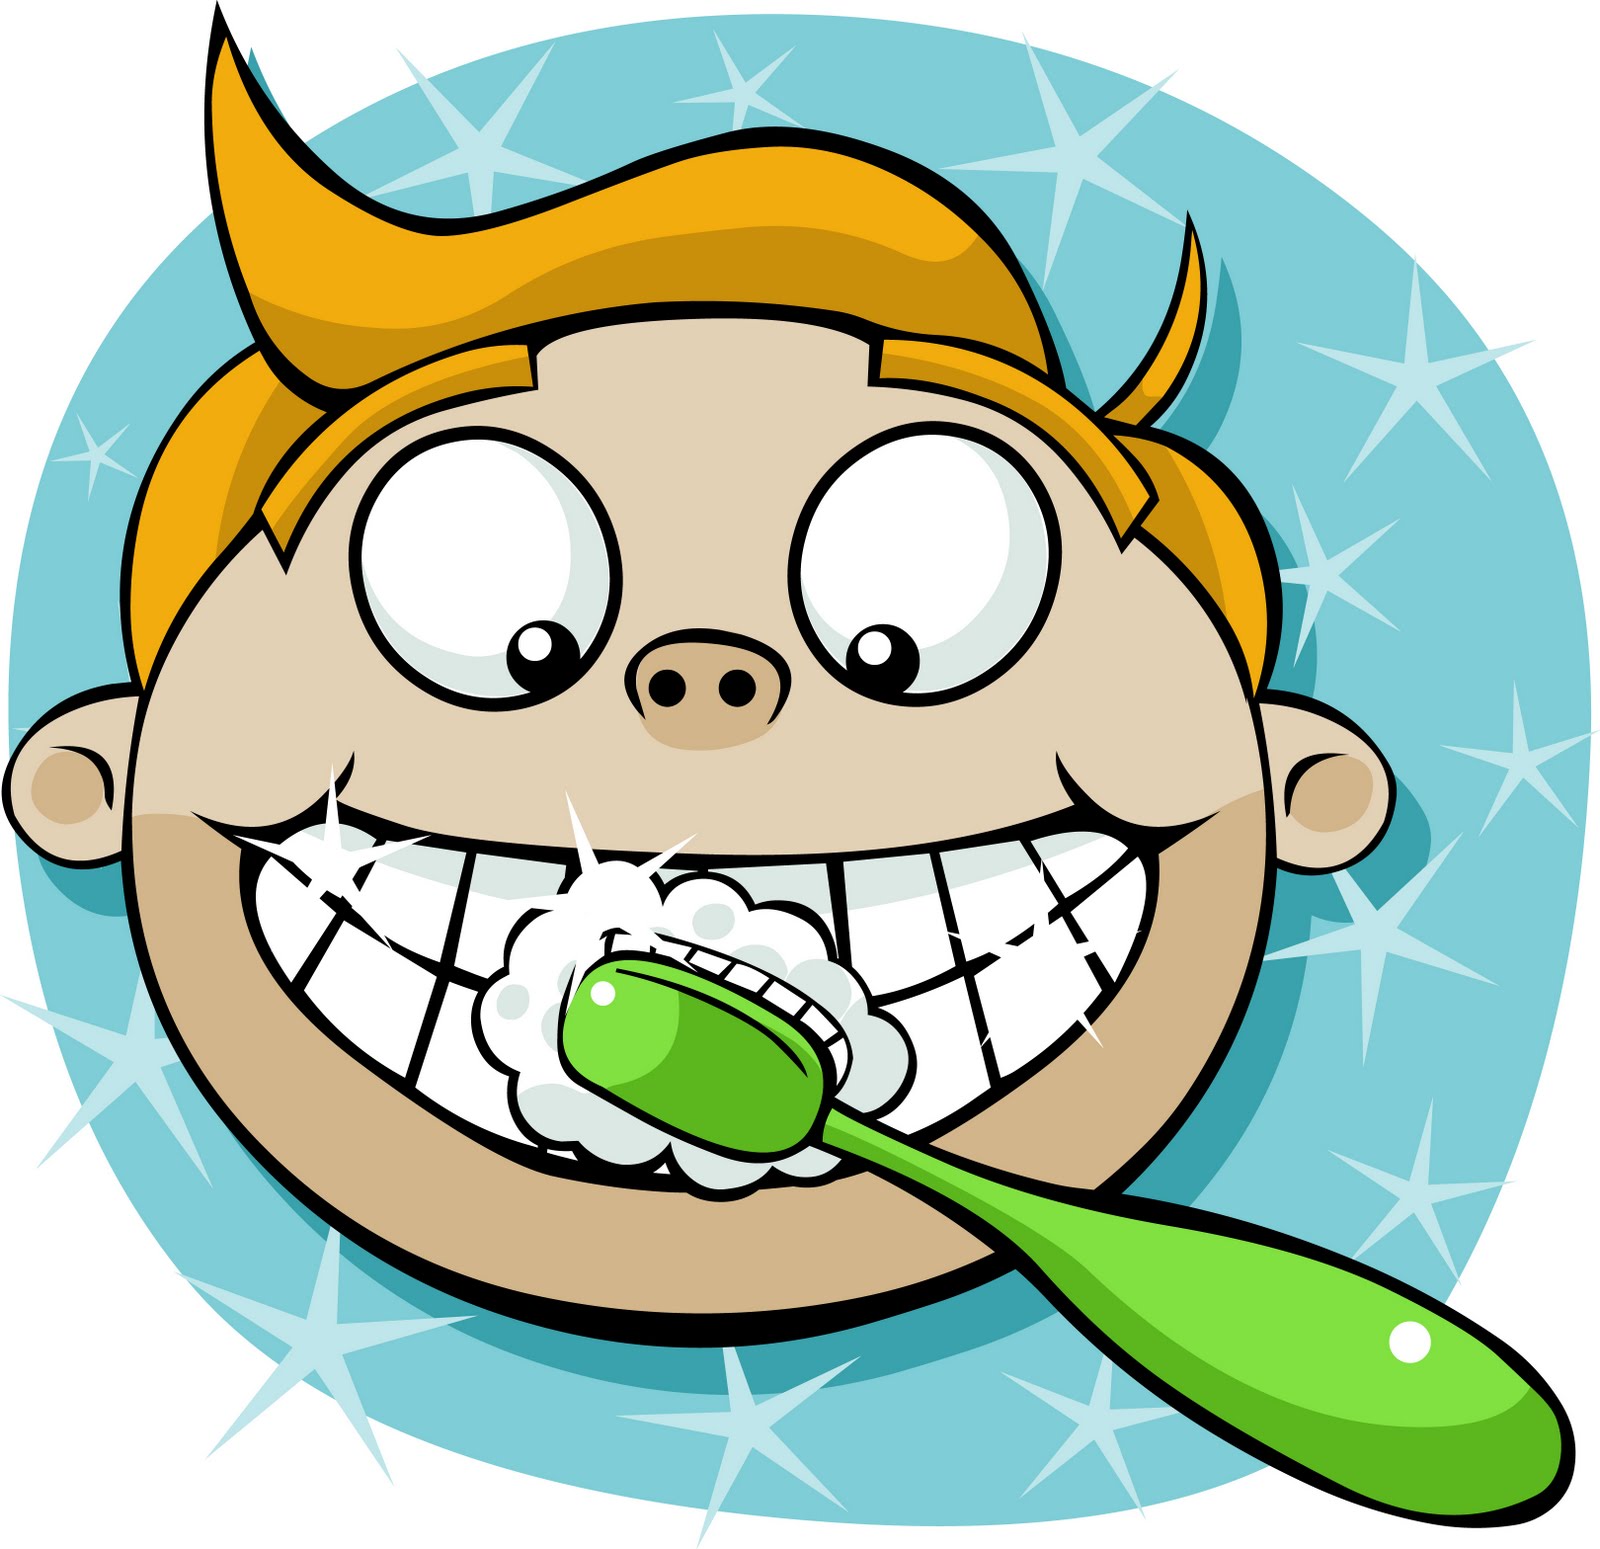 Download Clipart Icon - Brush Teeth Brush Your Teeth Hd Image.